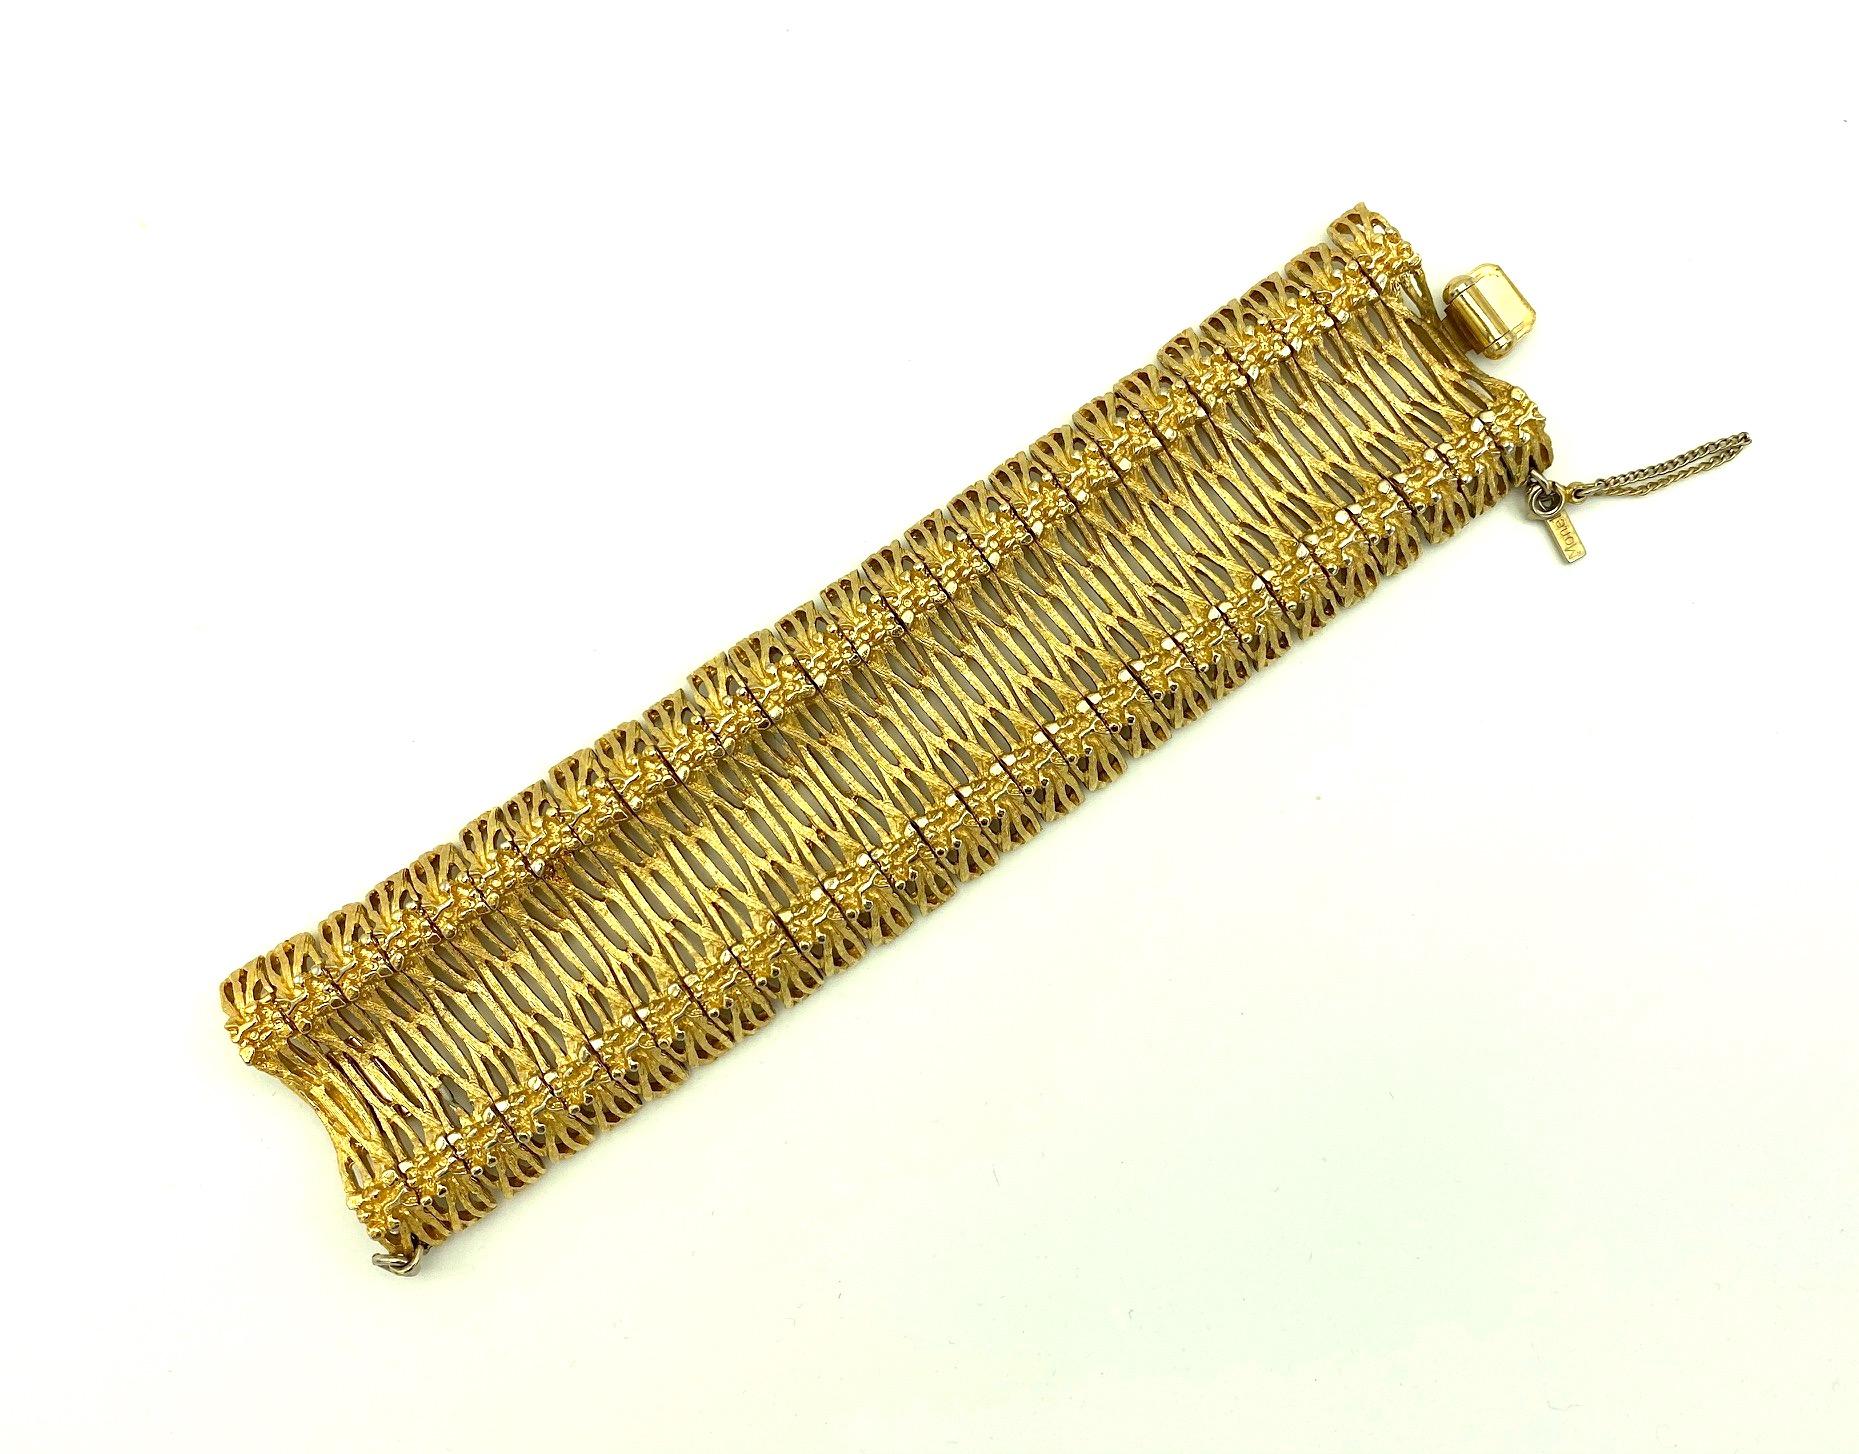 Monet 1960s wide satin gold plate bracelet comprised of twenty six wide bar links strung on two chains. Each link is narrow measuring a little over a quarter of an inch wide and 1.75 inches long. The links are concave in the center and rounded on